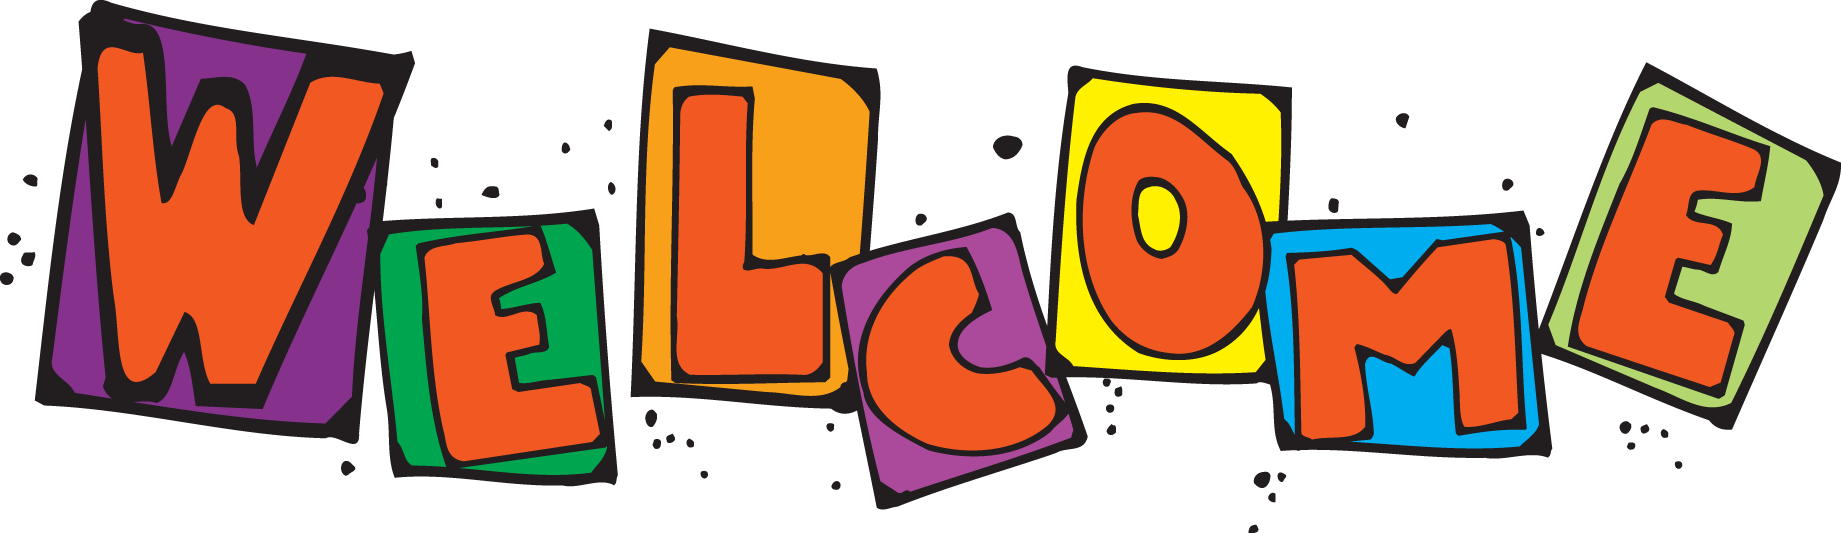 Welcome Images Hd Photos Clipart